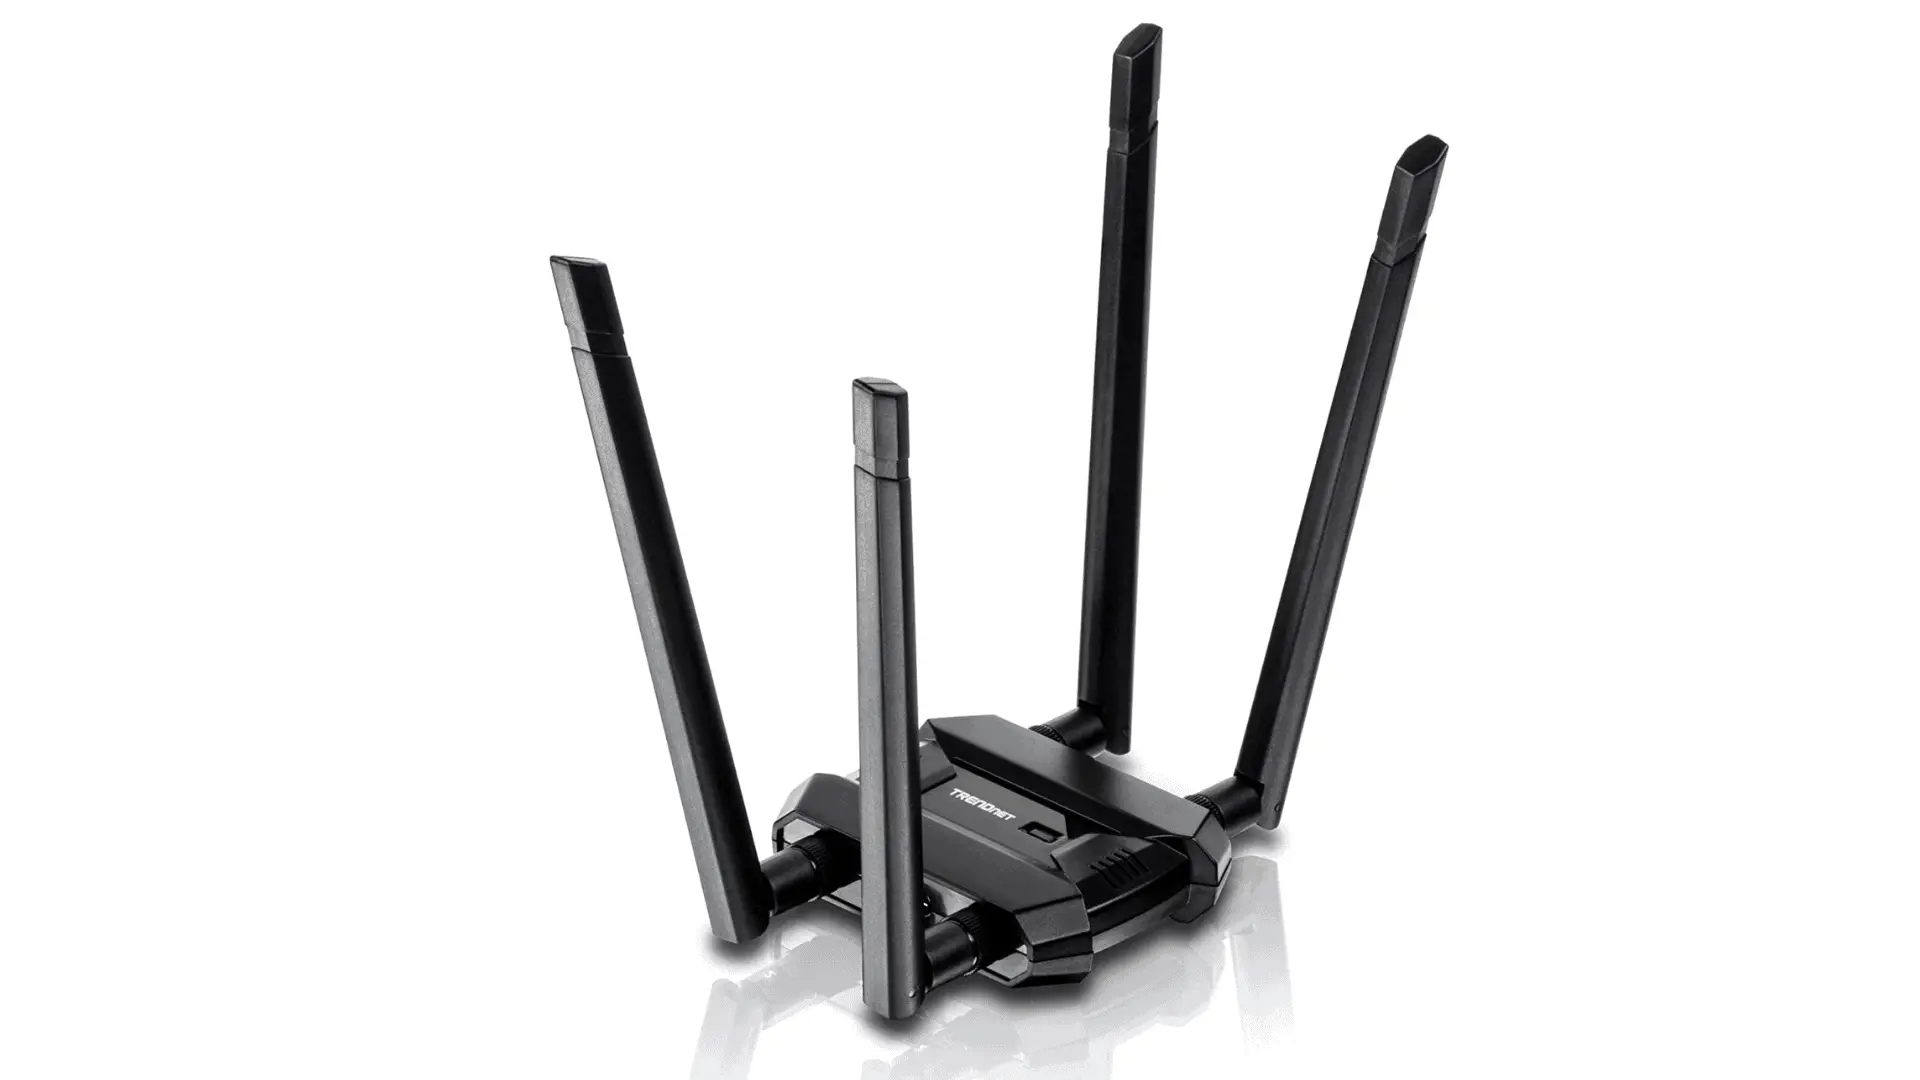 The TRENDnet TEW-809UB USB WiFi Adapter with four external and adjustable antennas in black.